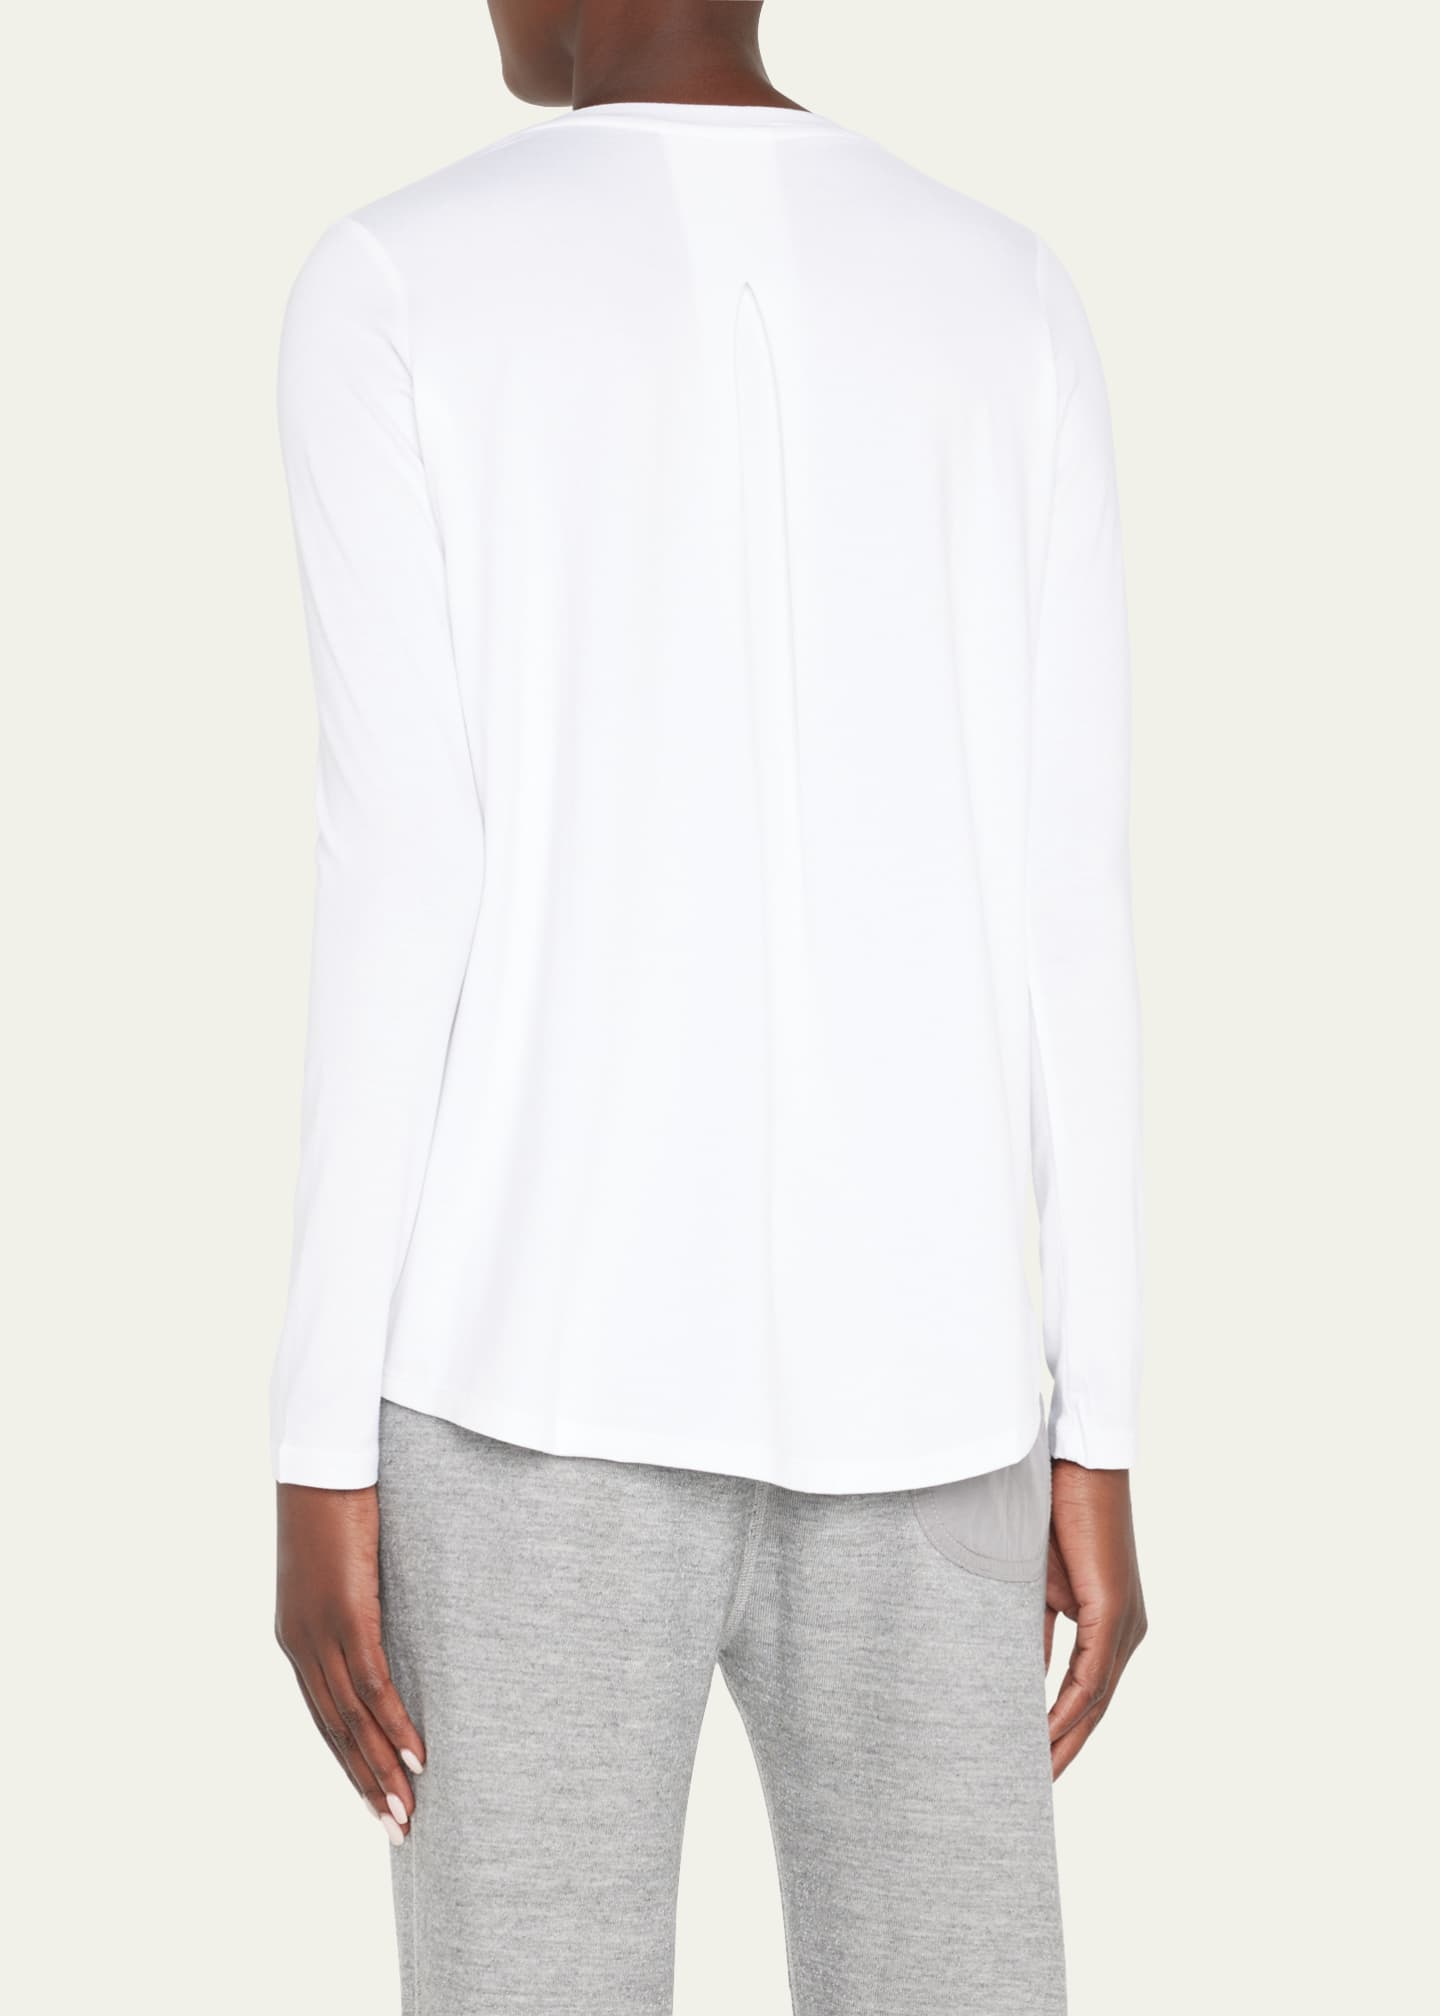 Majestic Filatures Soft Touch Pleated Crewneck Pullover - Bergdorf Goodman